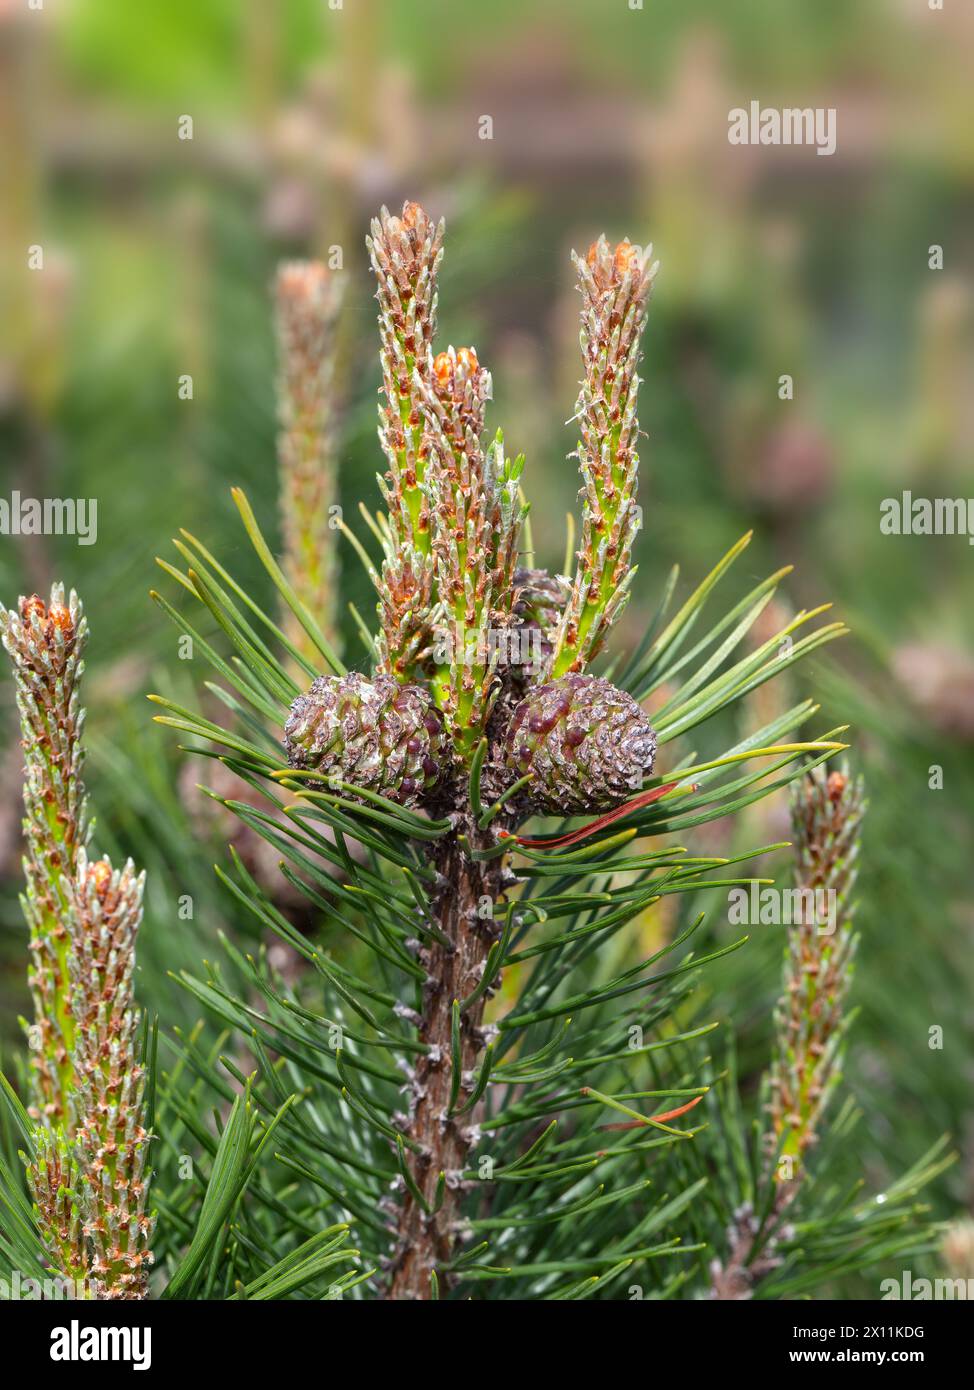 Closeup of needles and cones of Pinus mugo 'Humpy' in a garden in Spring Stock Photo